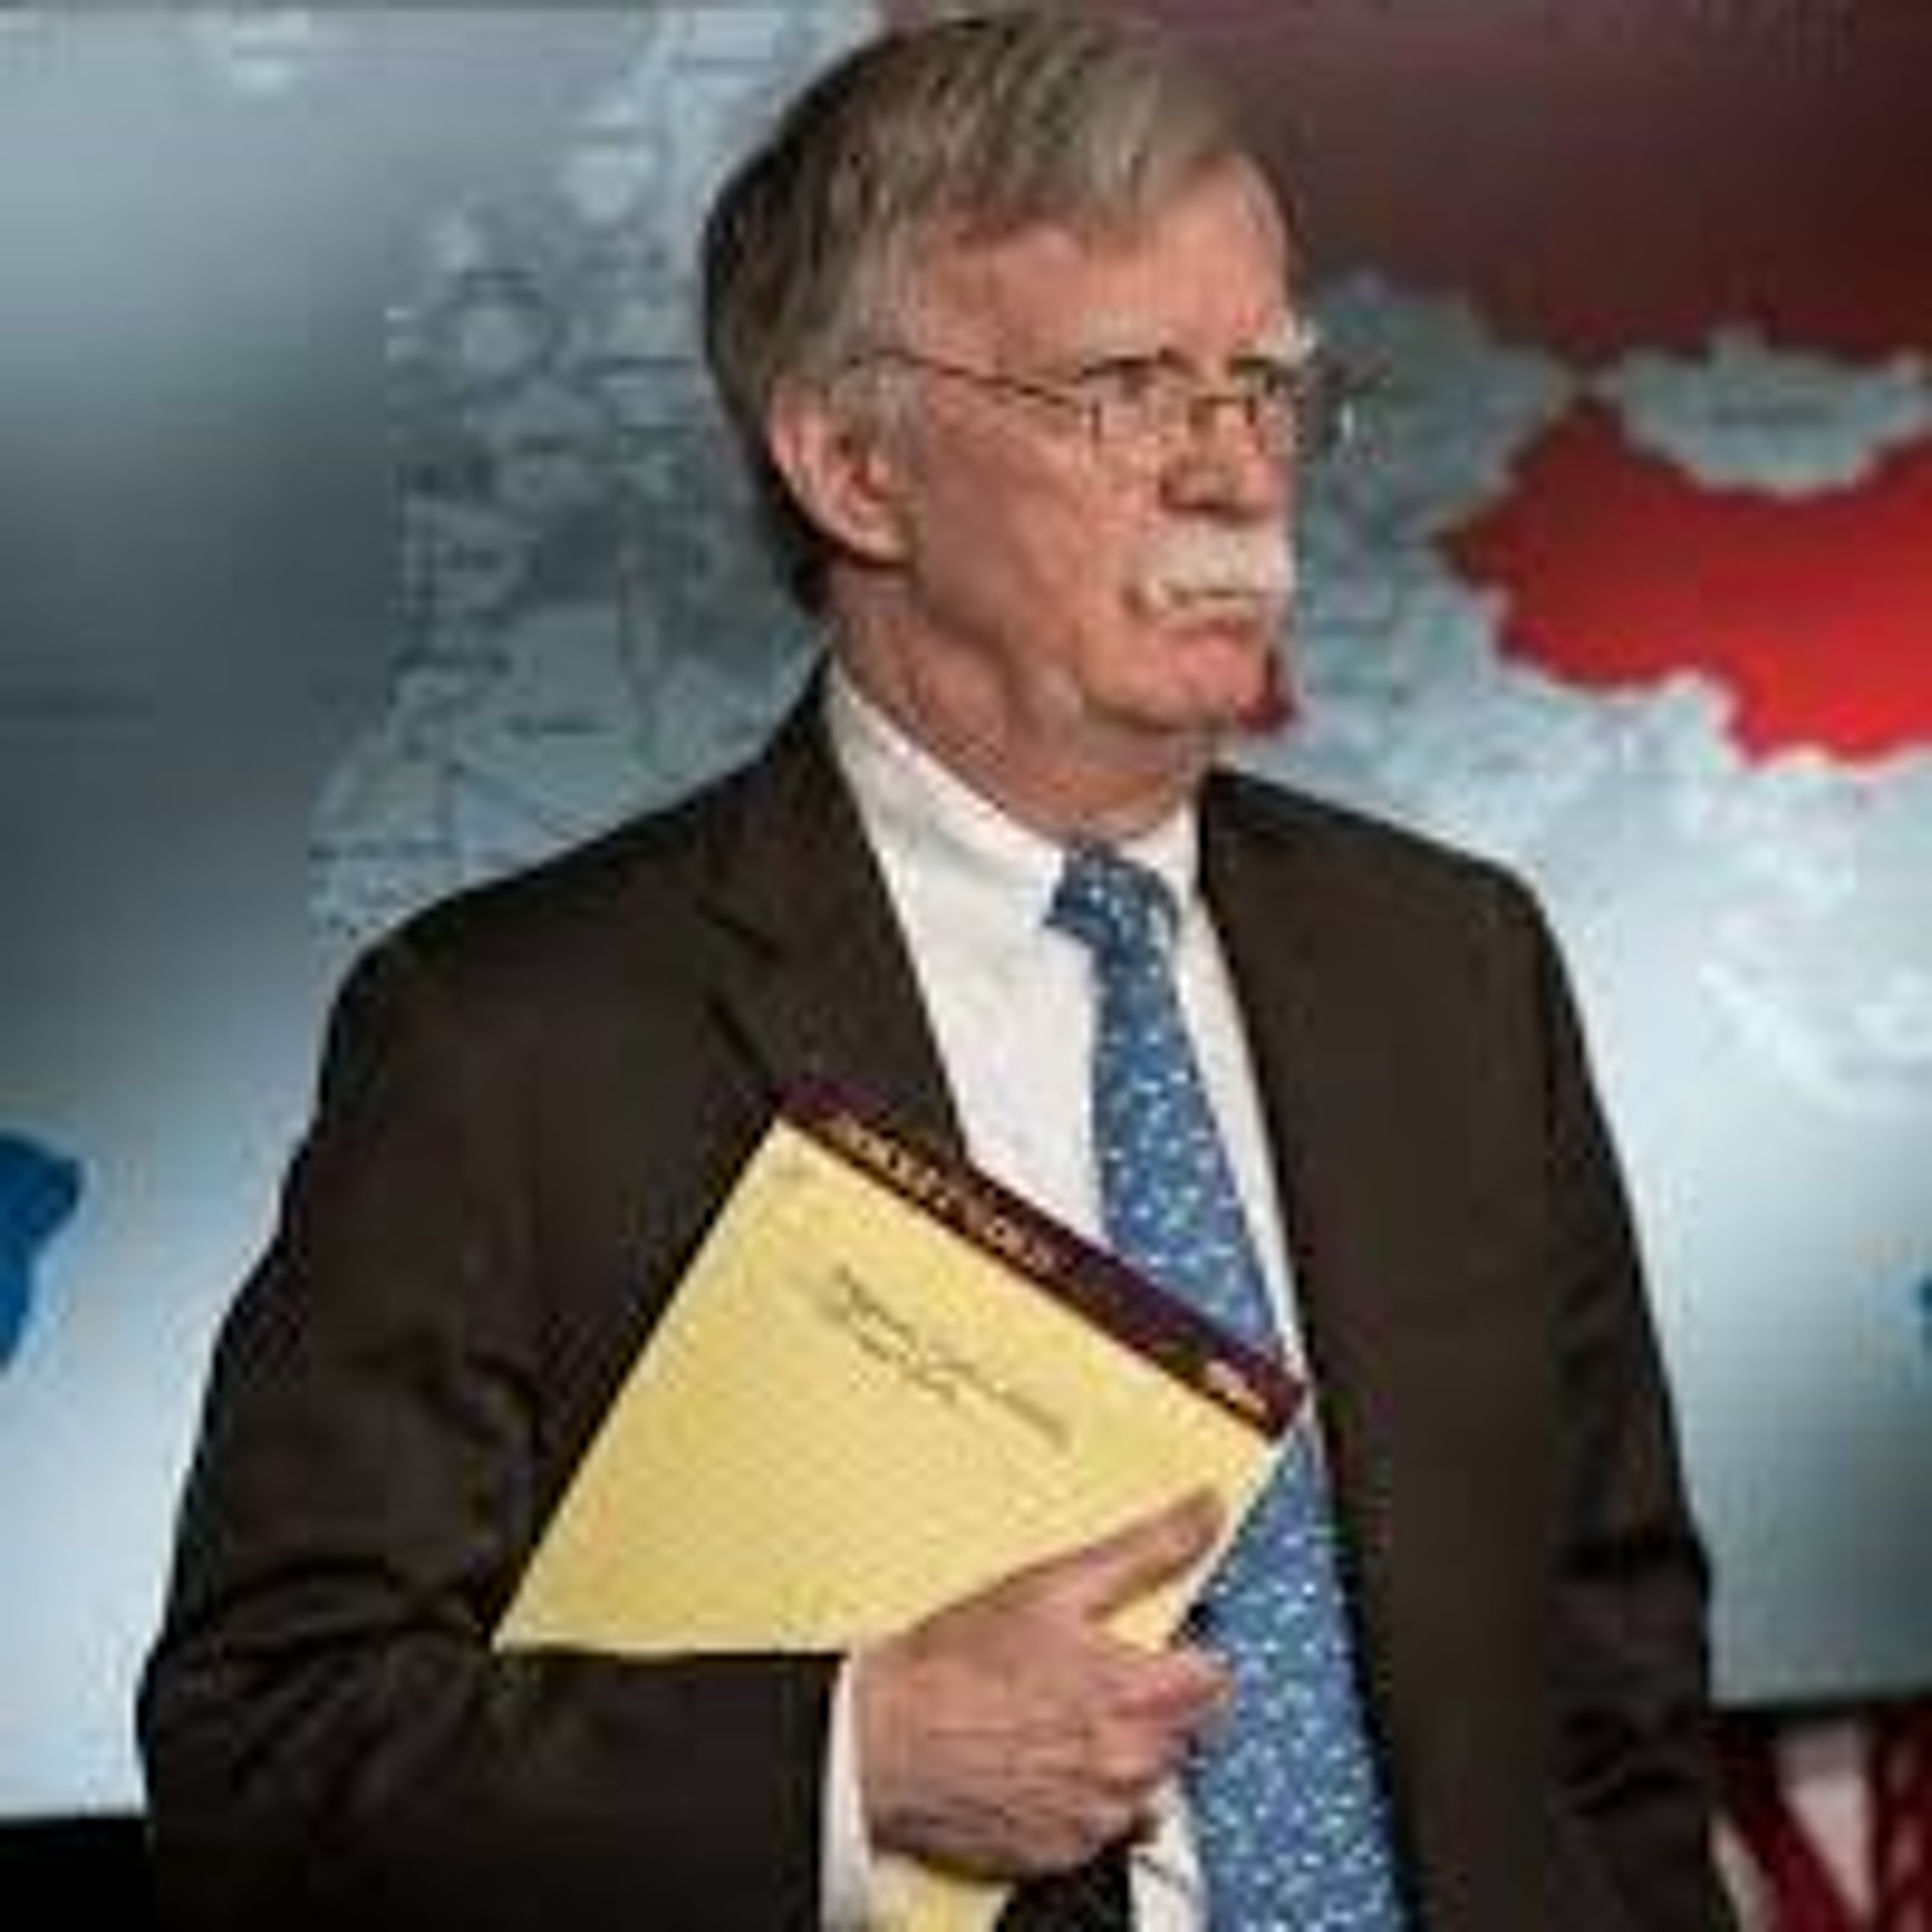 Bonkers Bolton Baits Troublesome Trump To Incite And Infuriate Irate Iran